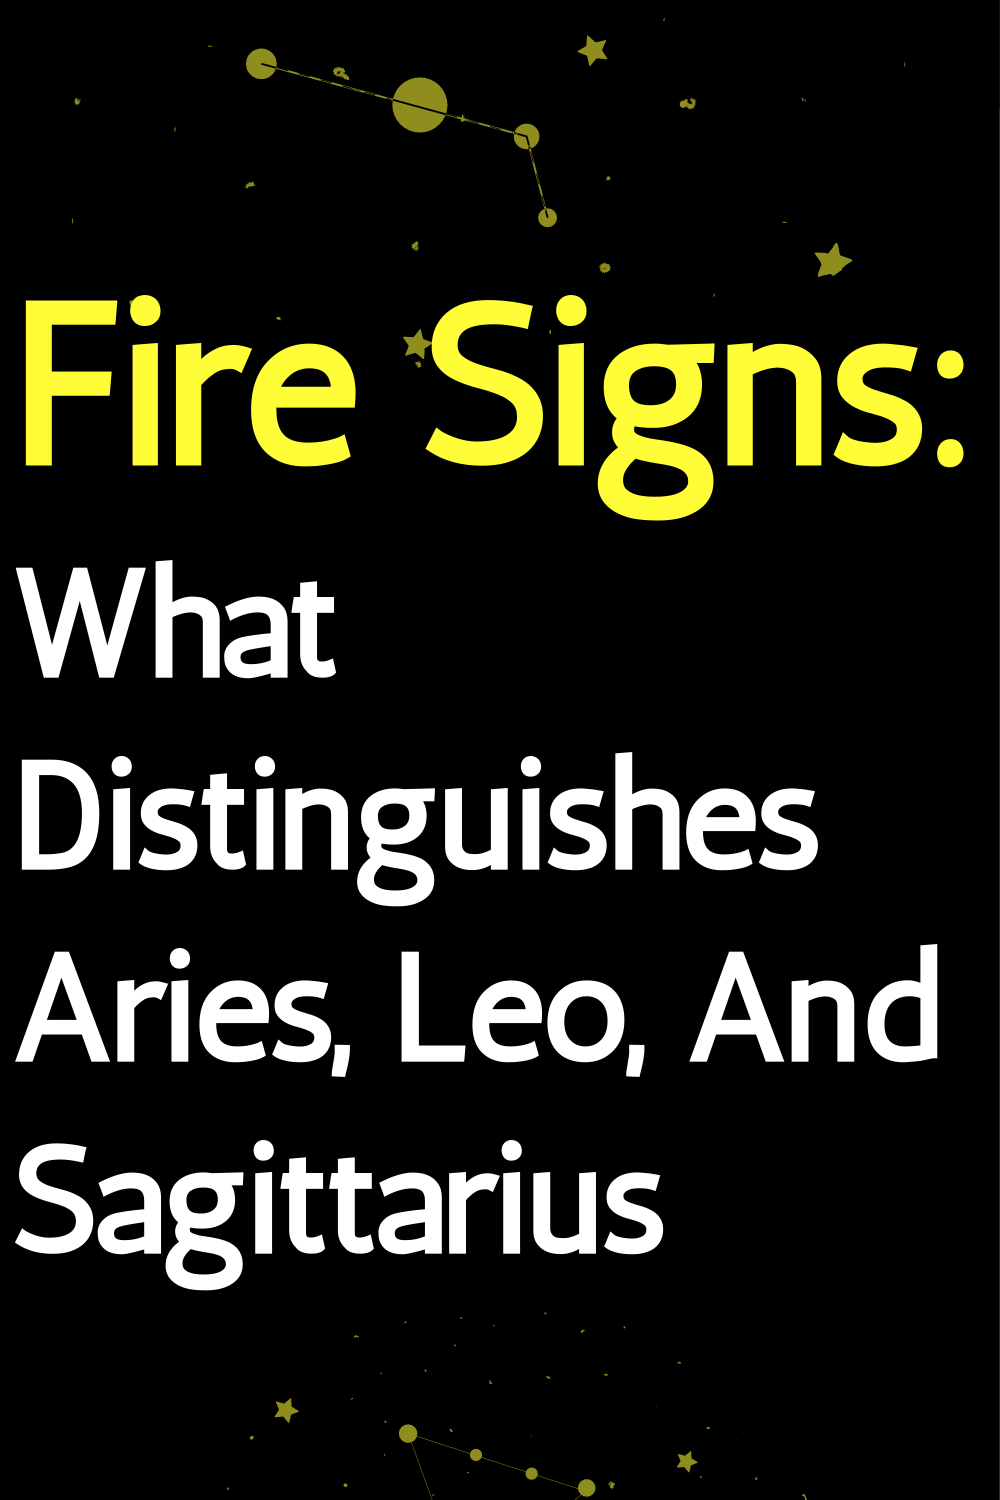 Fire Signs: What Distinguishes Aries, Leo, And Sagittarius